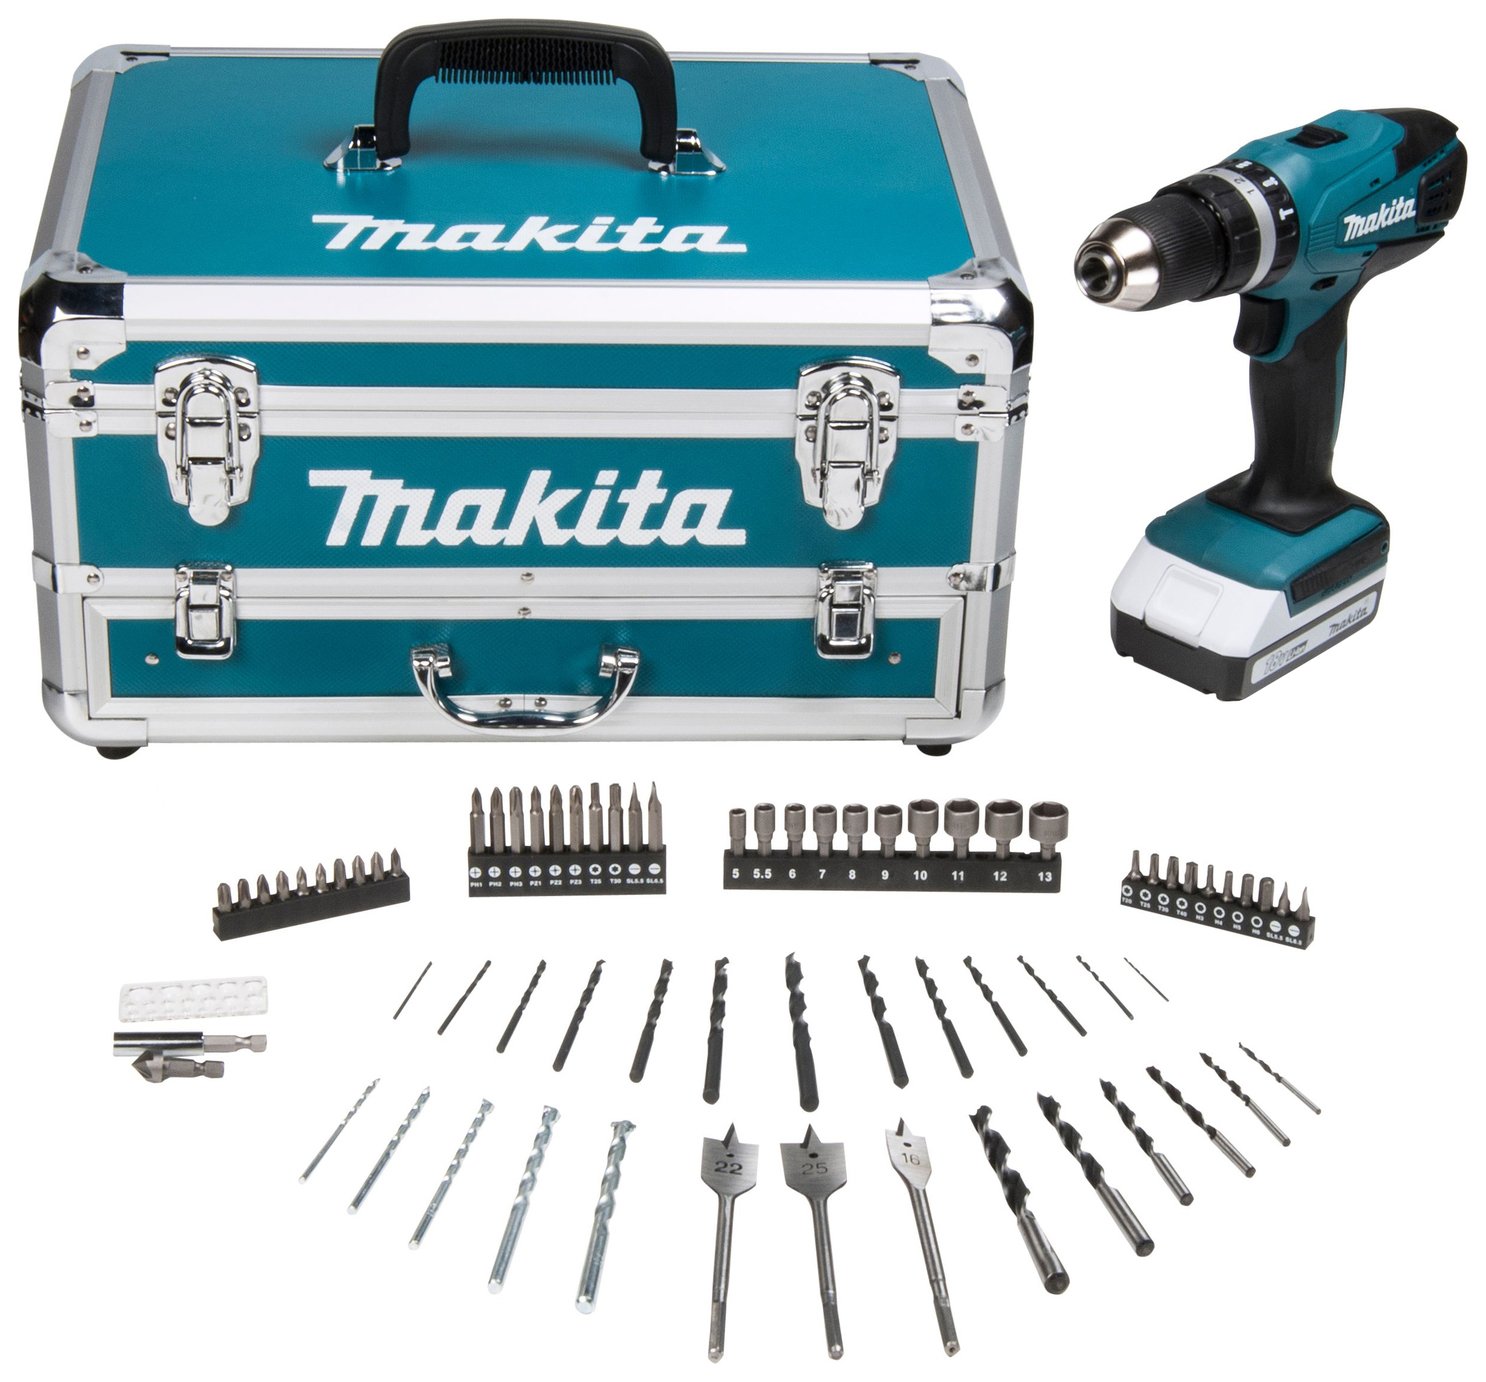 Makita G-Series Cordless Hammer Drill with 70 Accessories